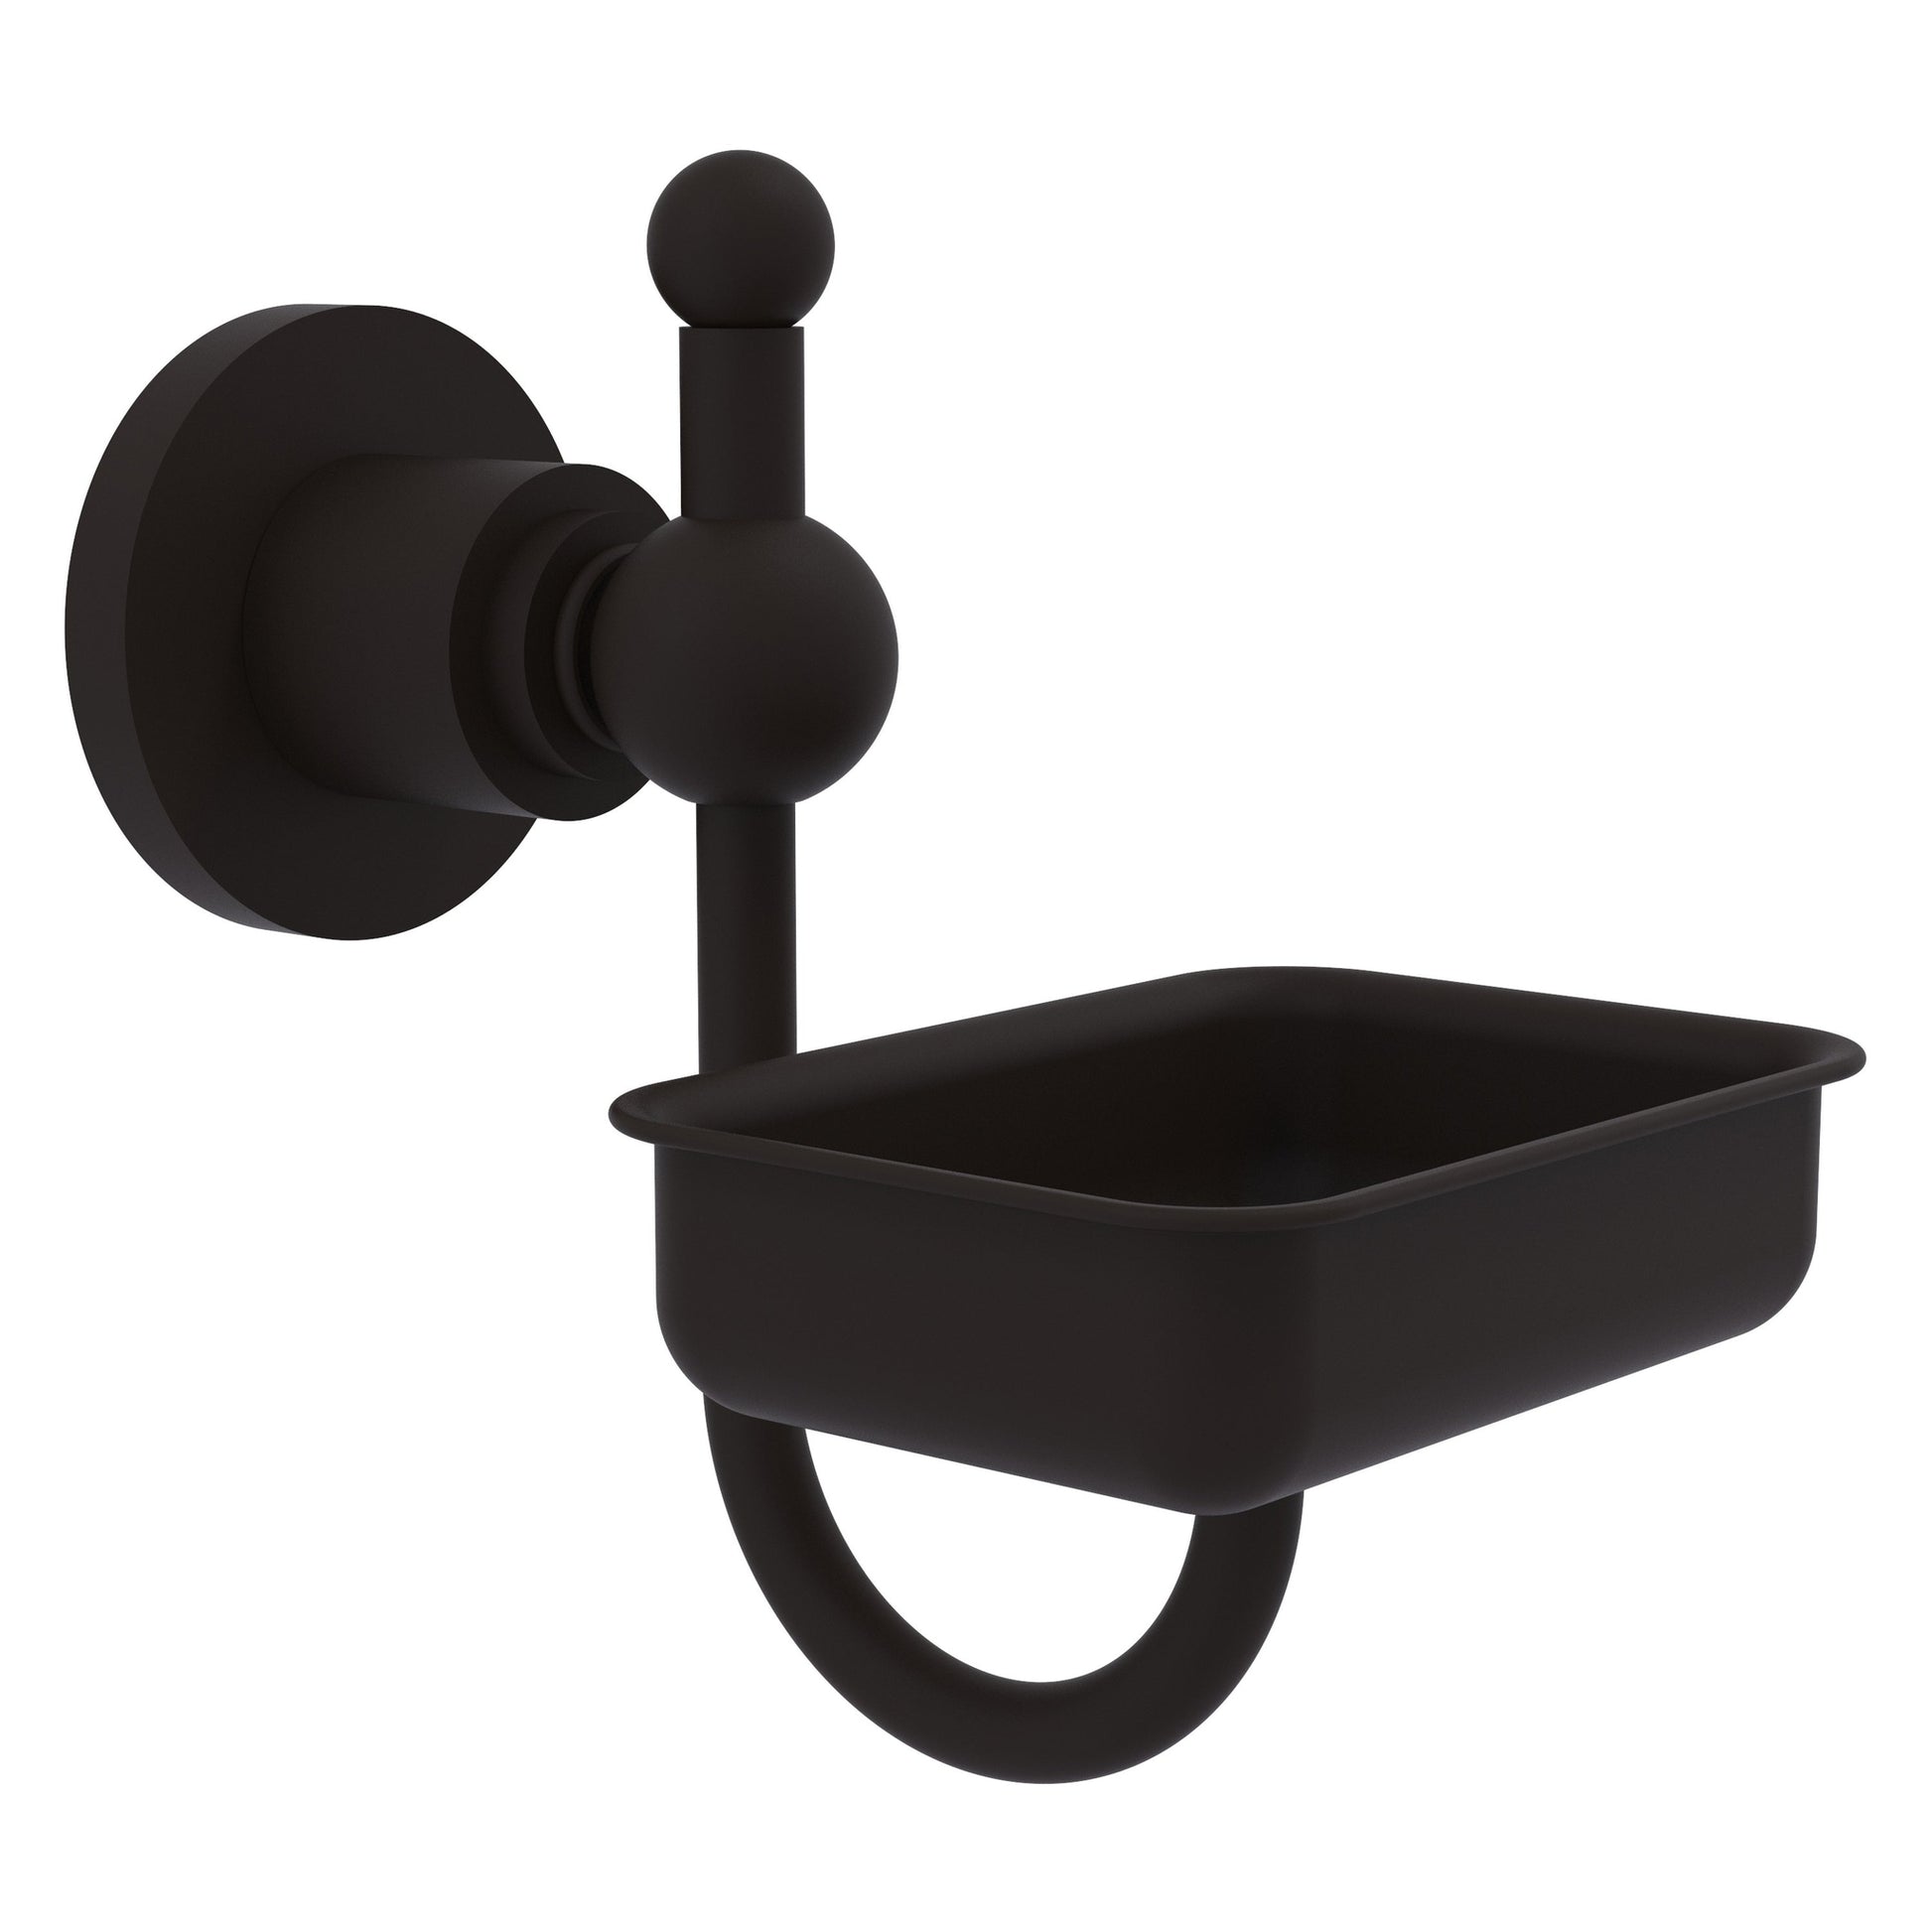 Allied Brass Astor Place 4.5" x 3.5" Oil Rubbed Bronze Solid Brass Wall-Mounted Soap Dish